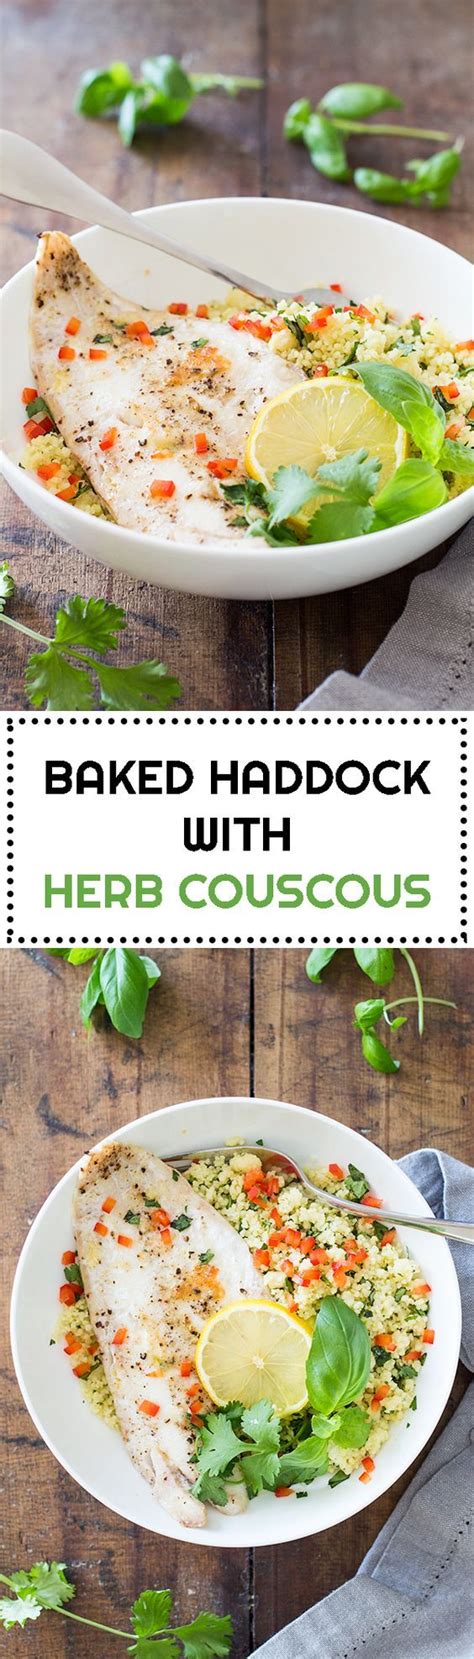 This smoked haddock and spring onion fishcakes recipe is perfect if you're following a calorie controlled diet, and fits well with any one of the major diet plans such as weight watchers. Baked Haddock with Herb Couscous - Green Healthy Cooking ...